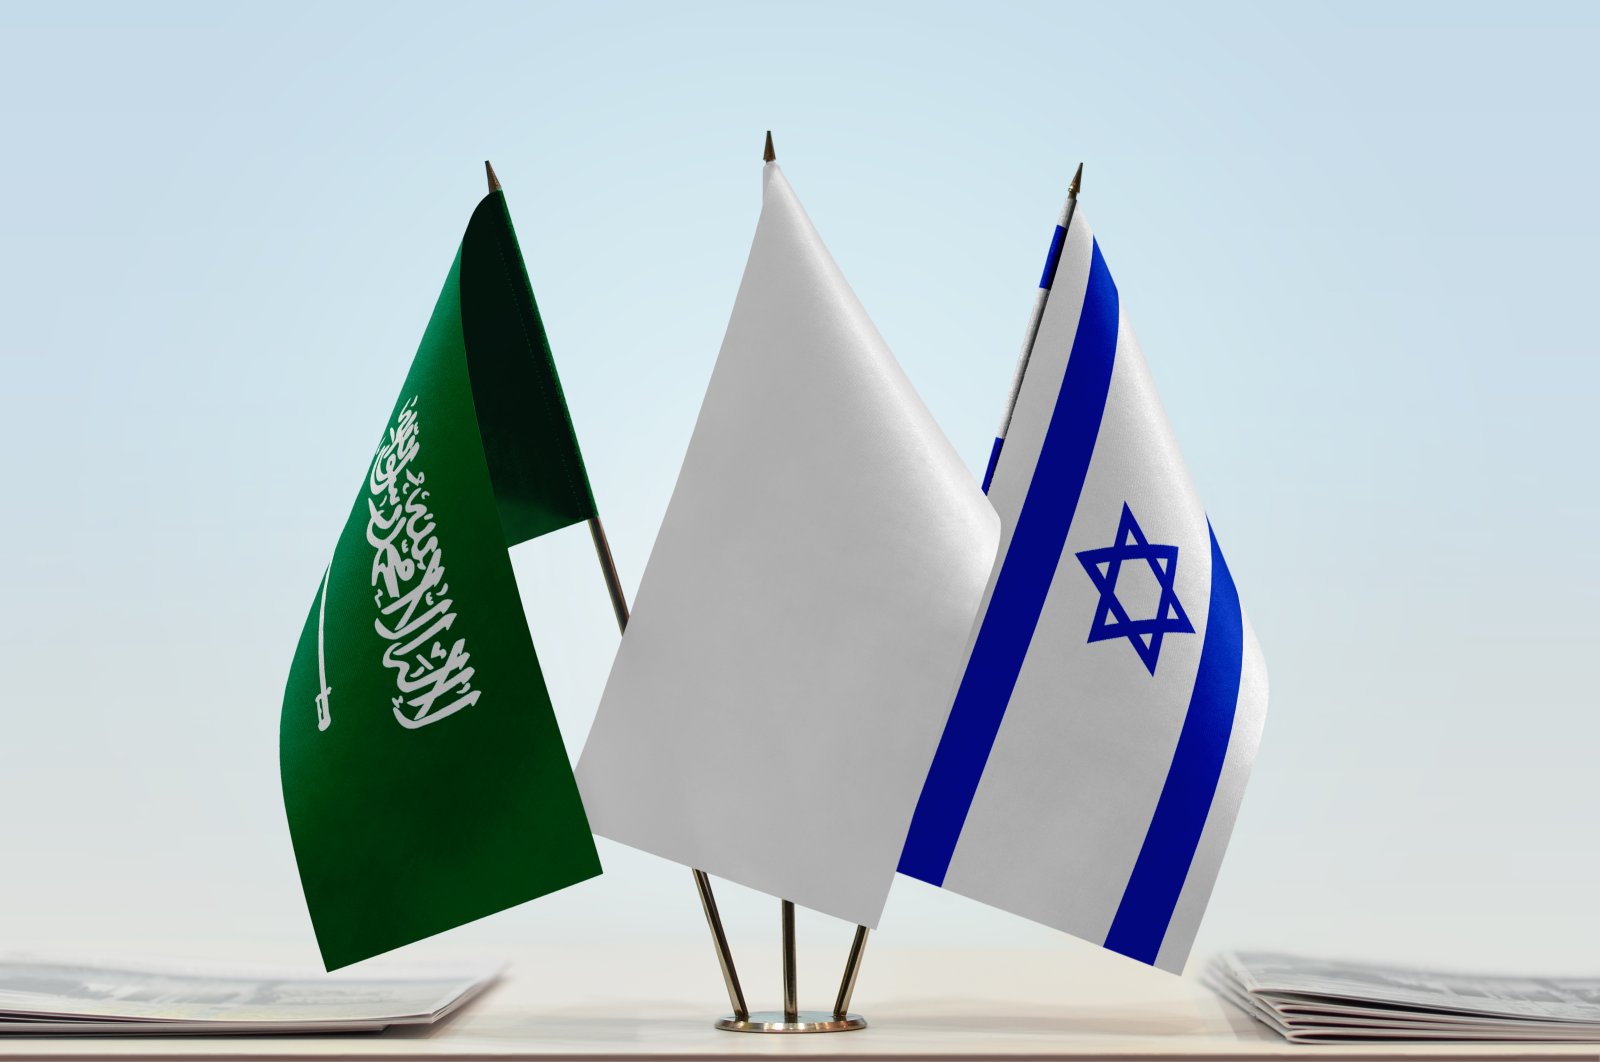 The flags of Saudi Arabia (L) and Israel (R) with a white flag in the middle. (Shutterstock Photo)